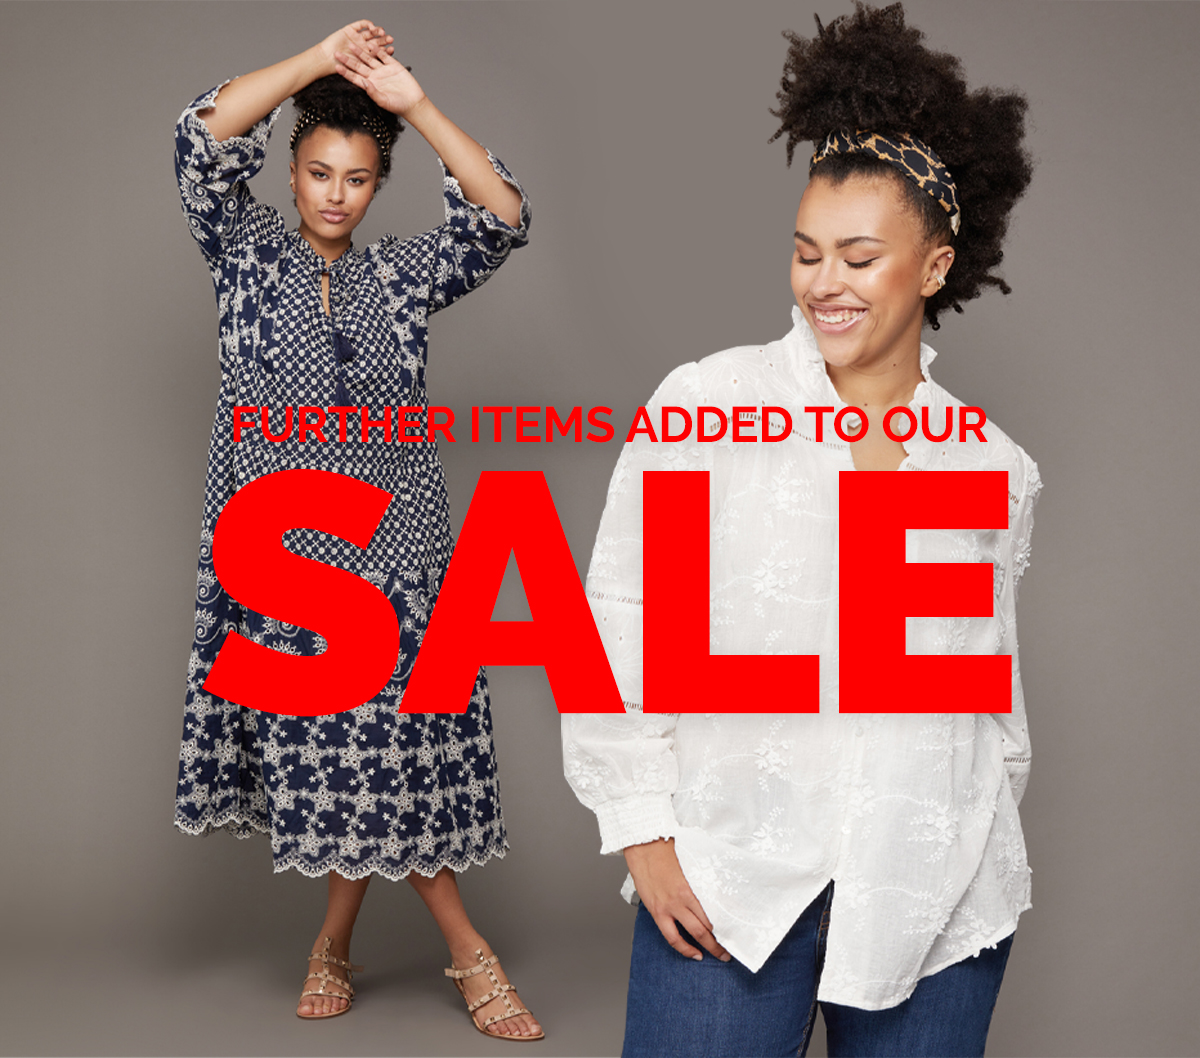 test Twitter Media - Your favourites are now in our SALE
https://t.co/kwh8VxU6Zt #annascholz #plussize #plussizesale https://t.co/gM7M4A2WtI